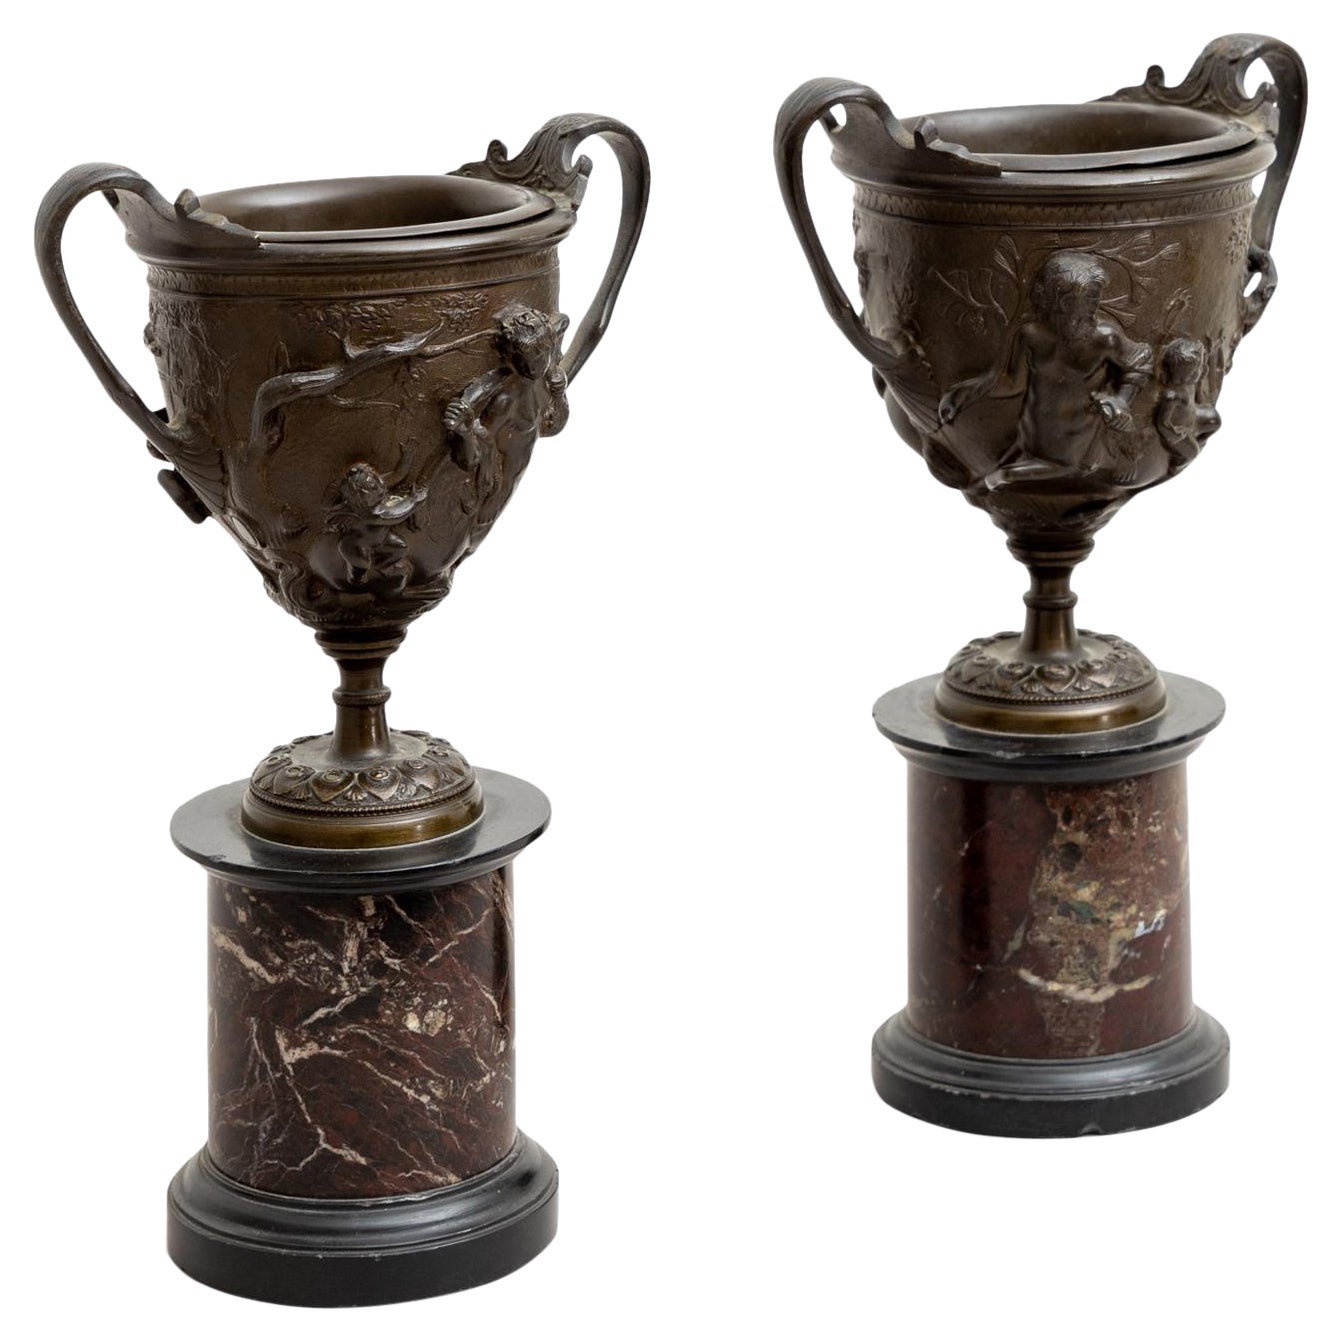 Bronze Tazzas After a Pompeian Antique, Italy 19th Century